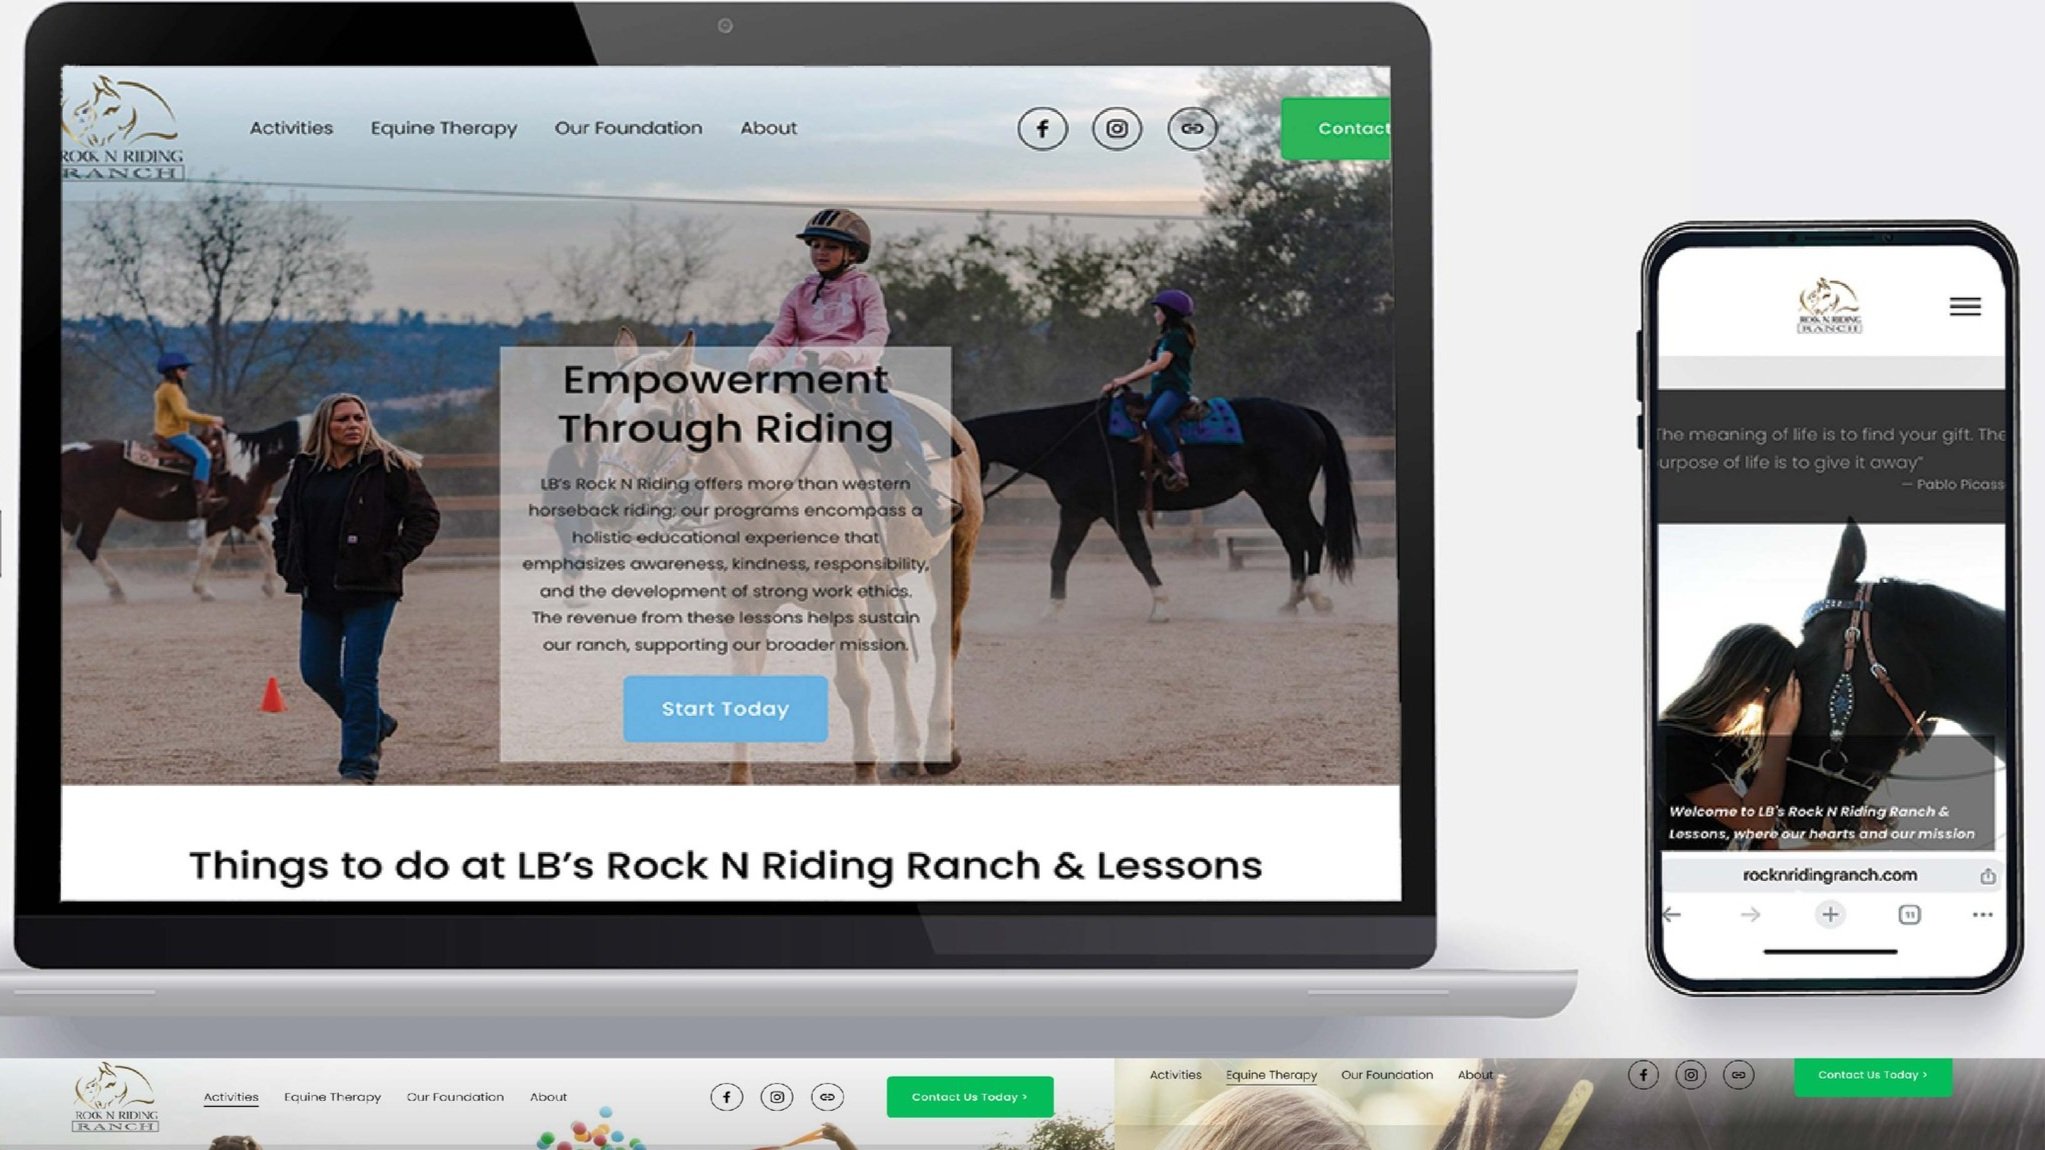 The Rock N Riding Ranch Foundation